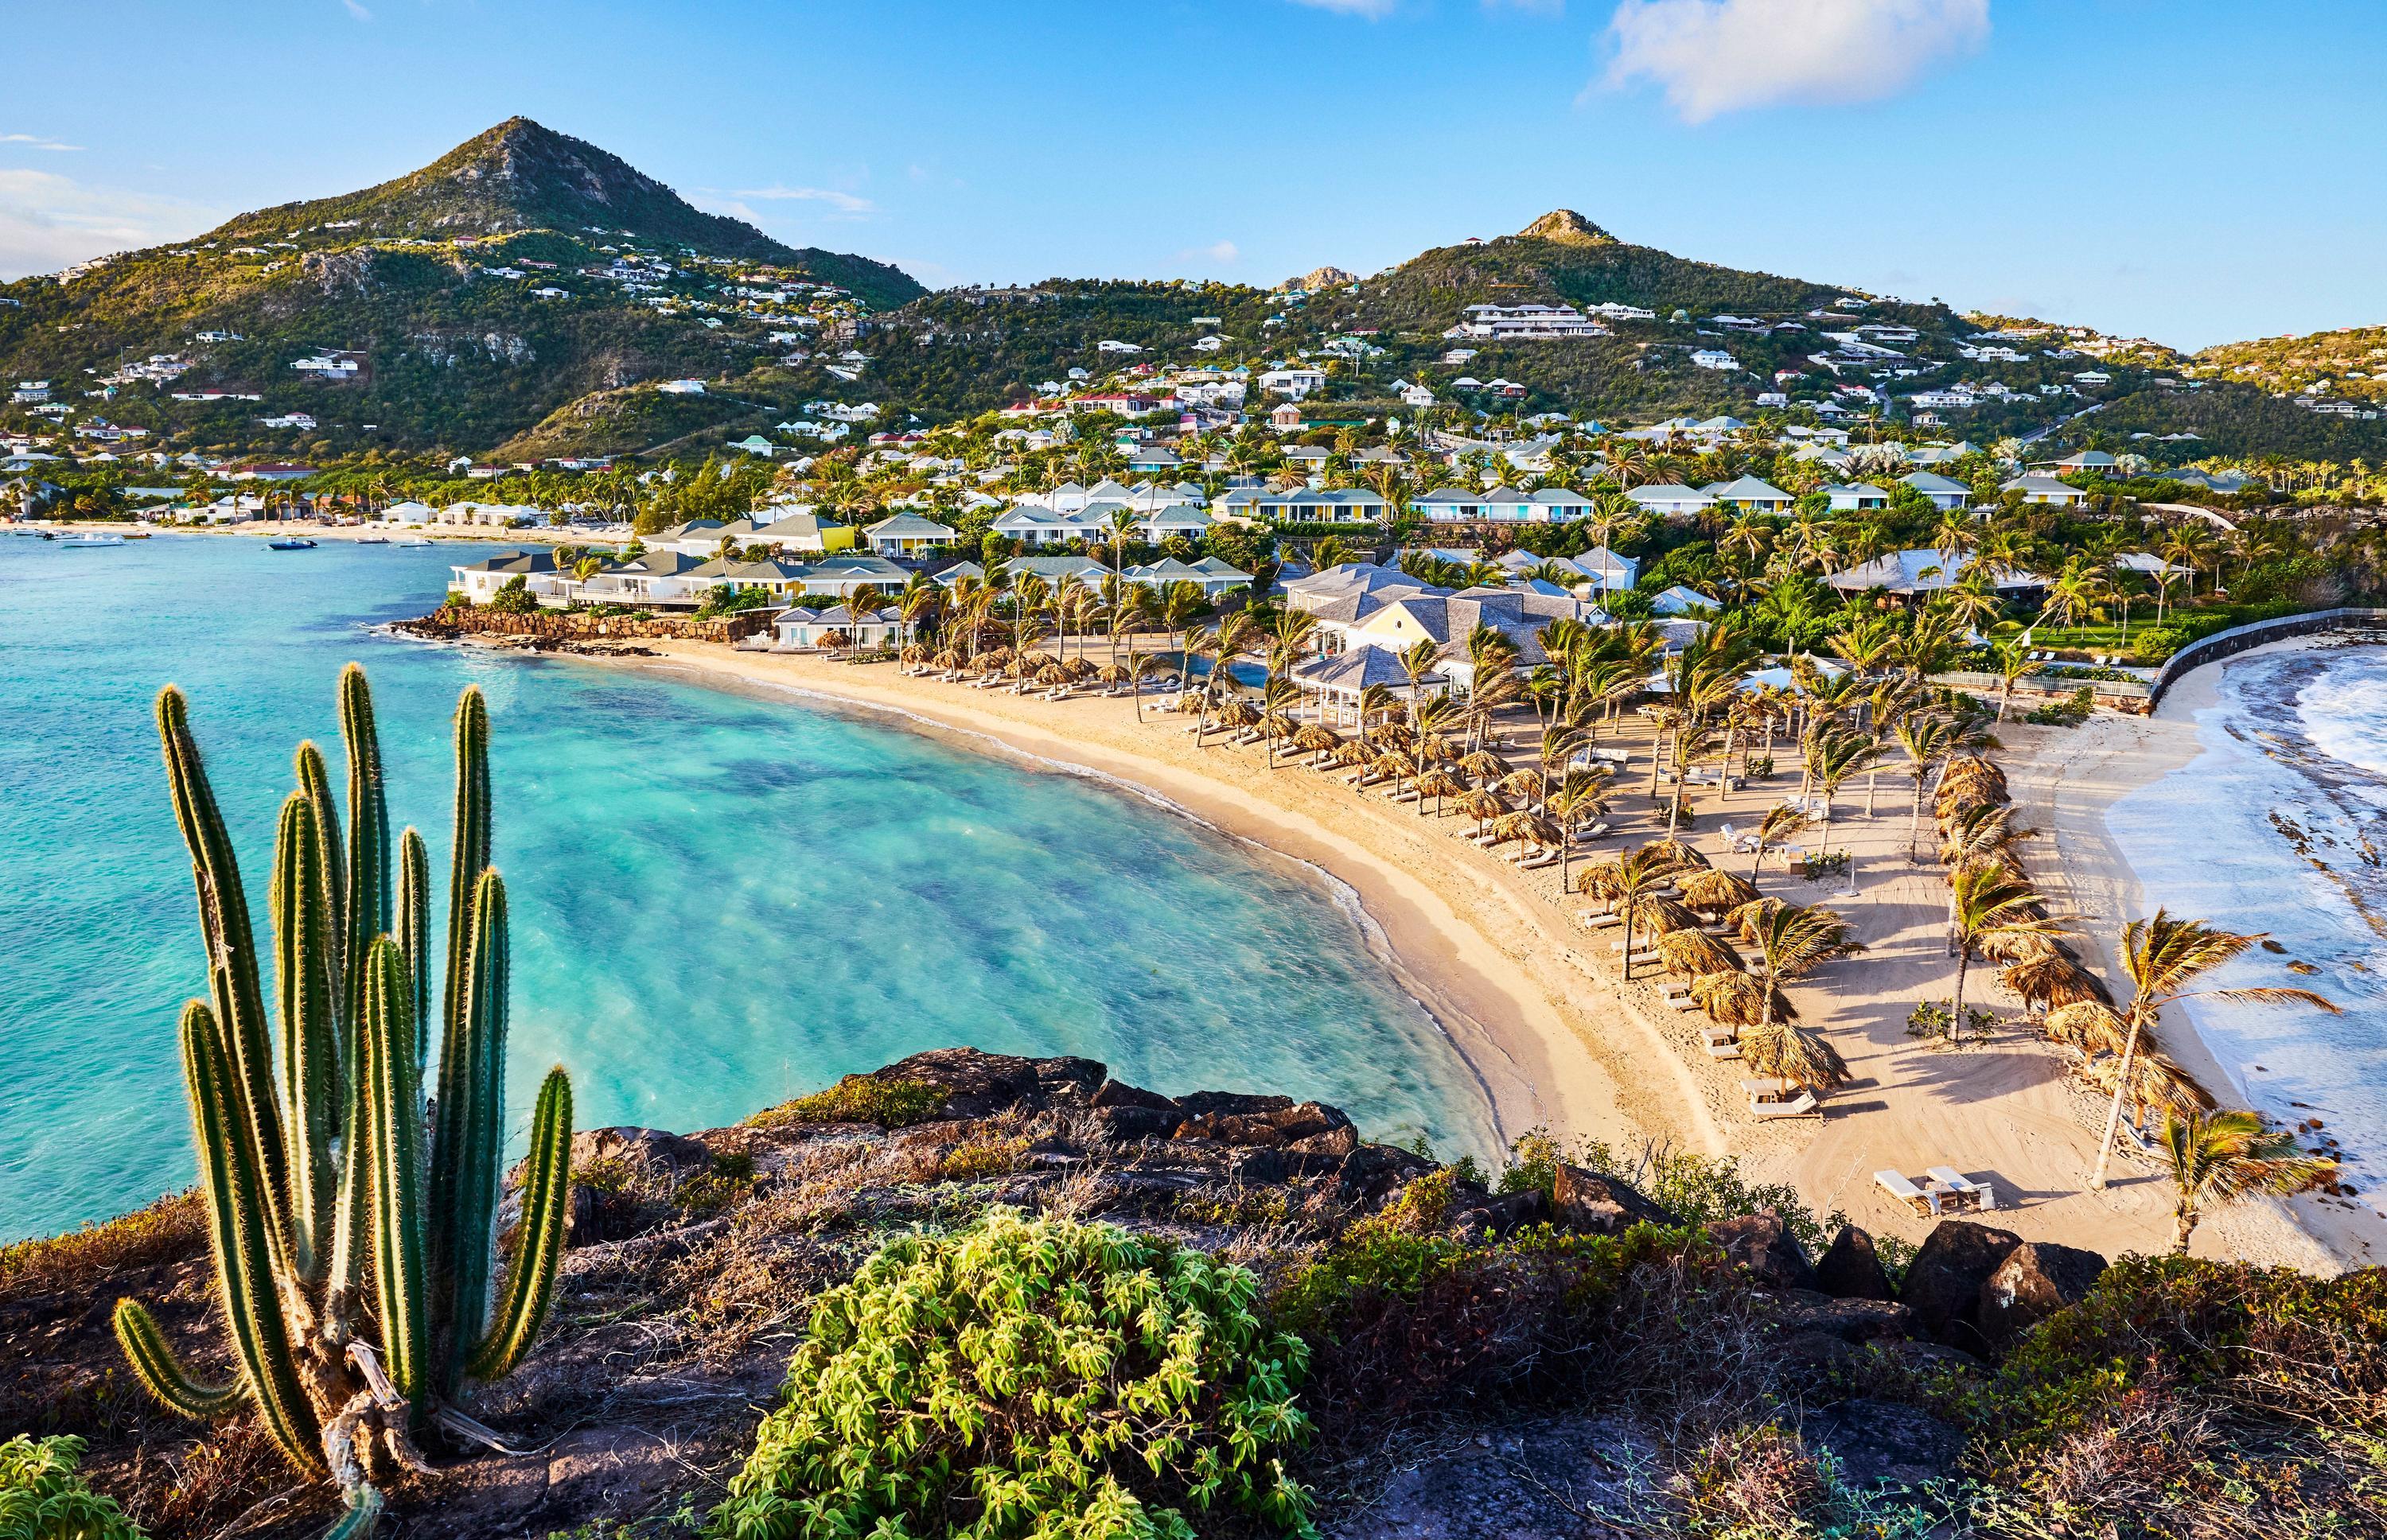 Top Hotels in St. Barthelemy from $467 - Expedia